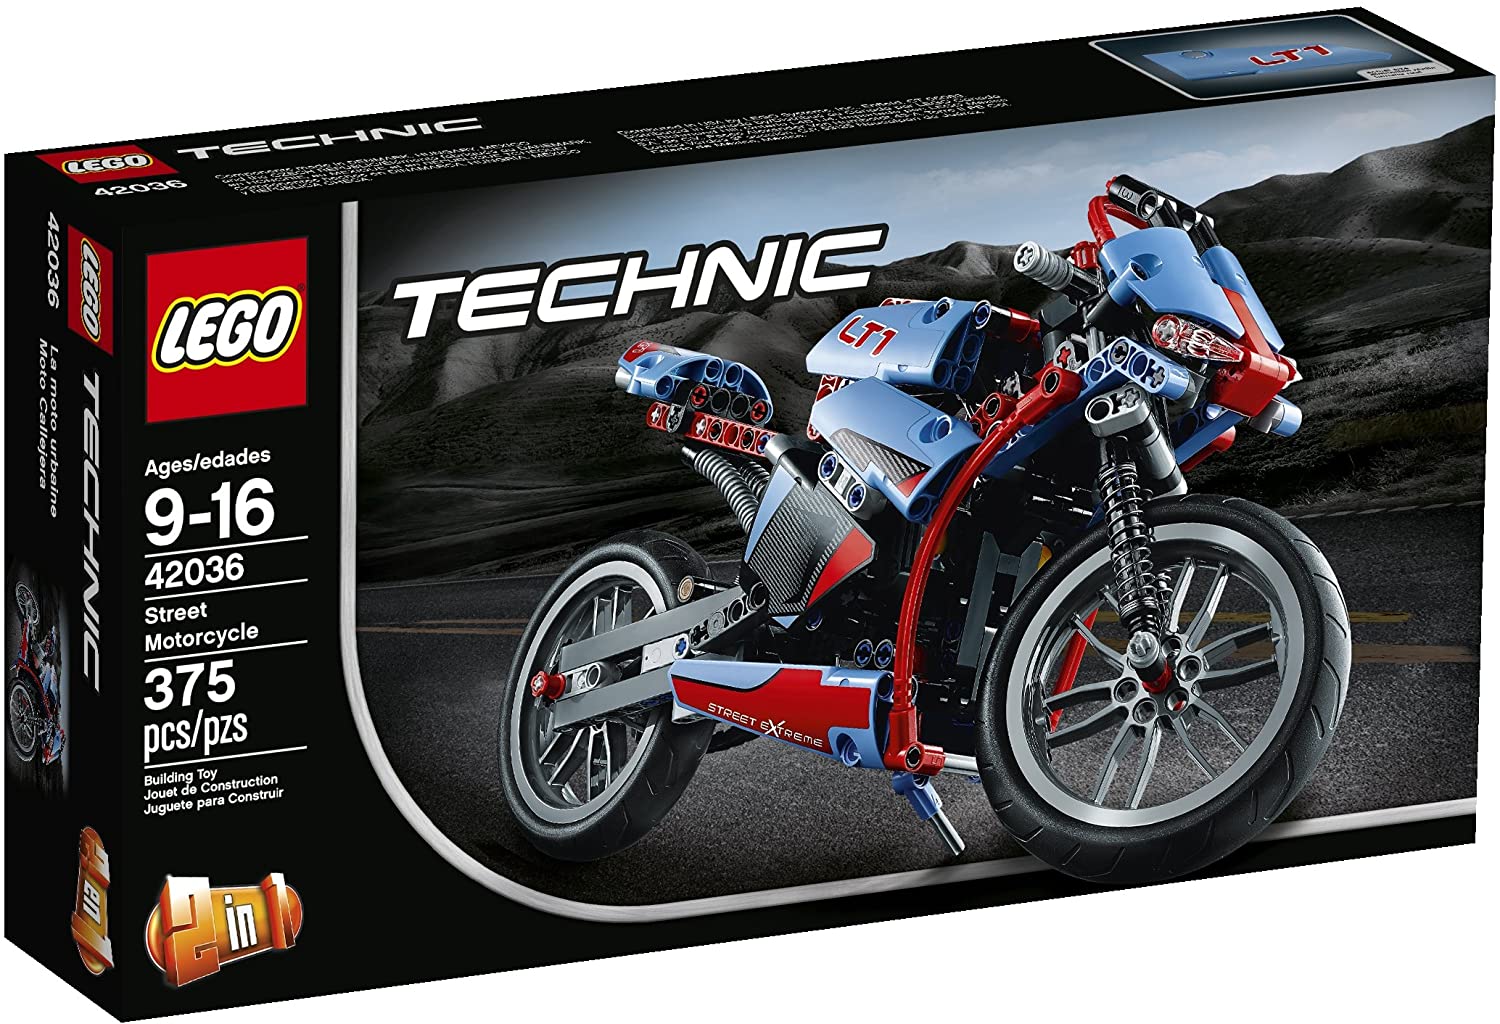 7 Best LEGO Motorcycle Sets 2022 - Buying Guide & Reviews 1